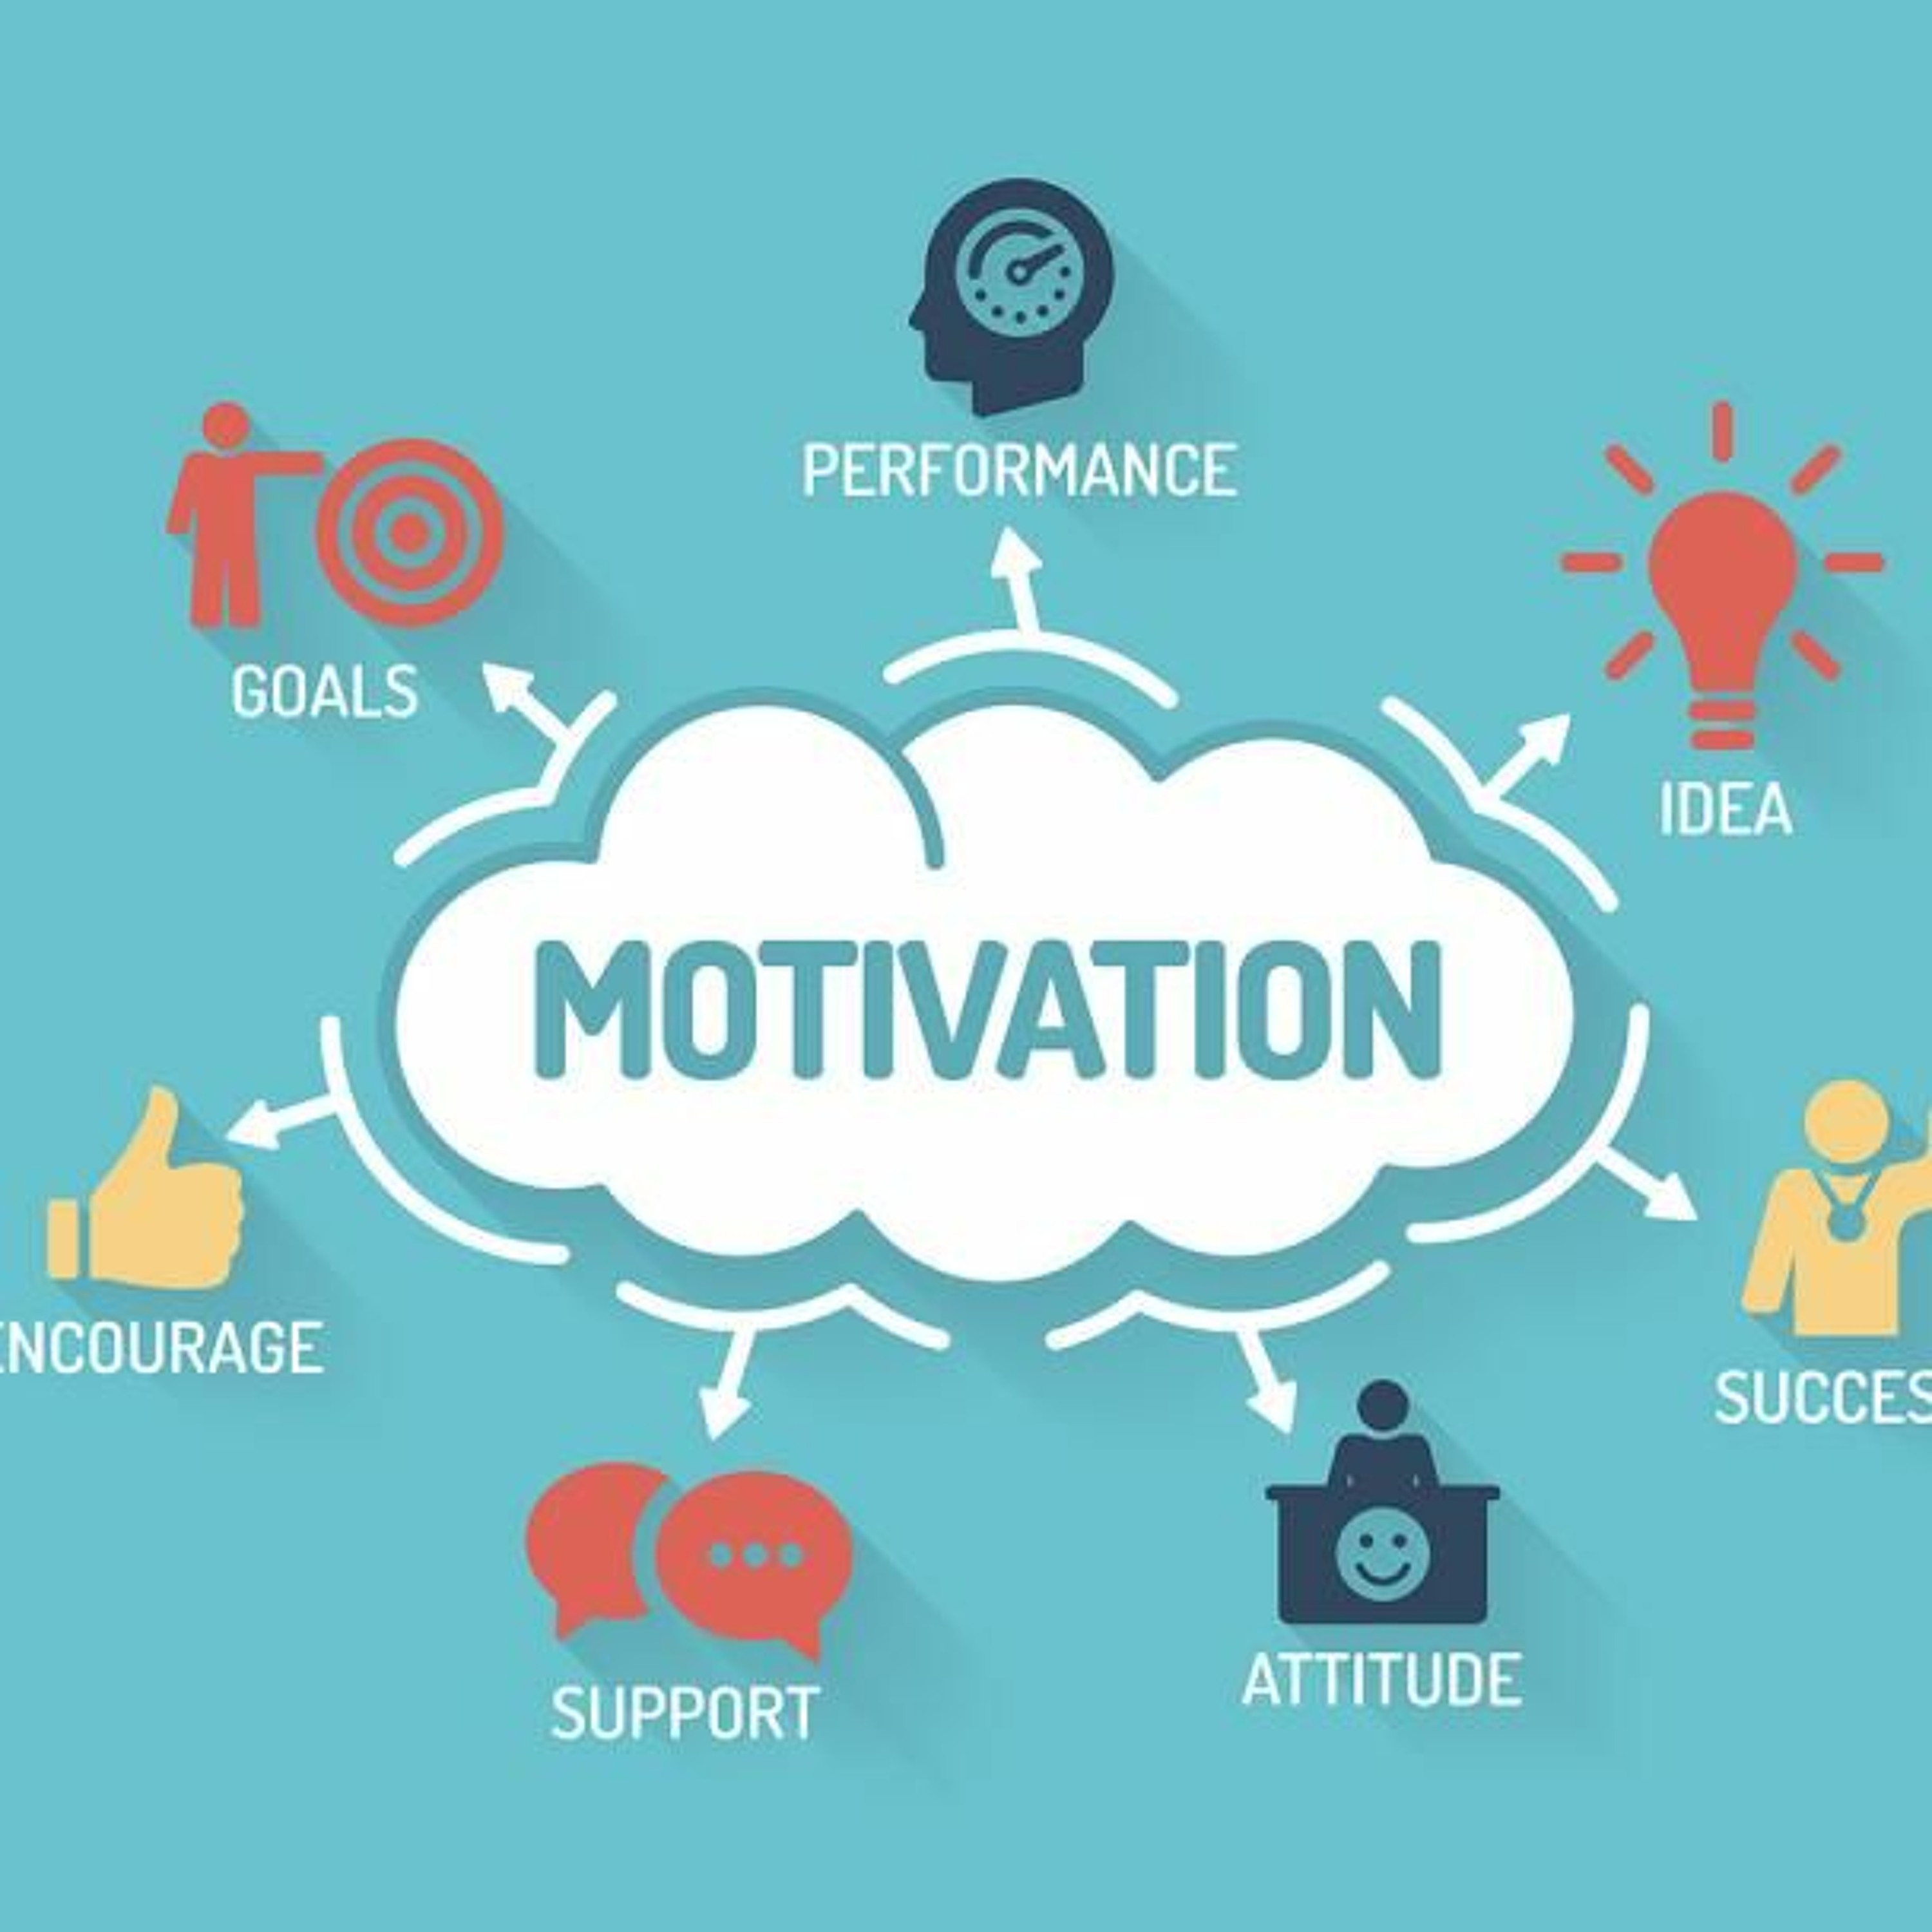 Motivation - How To Motivate Others - The External Factors